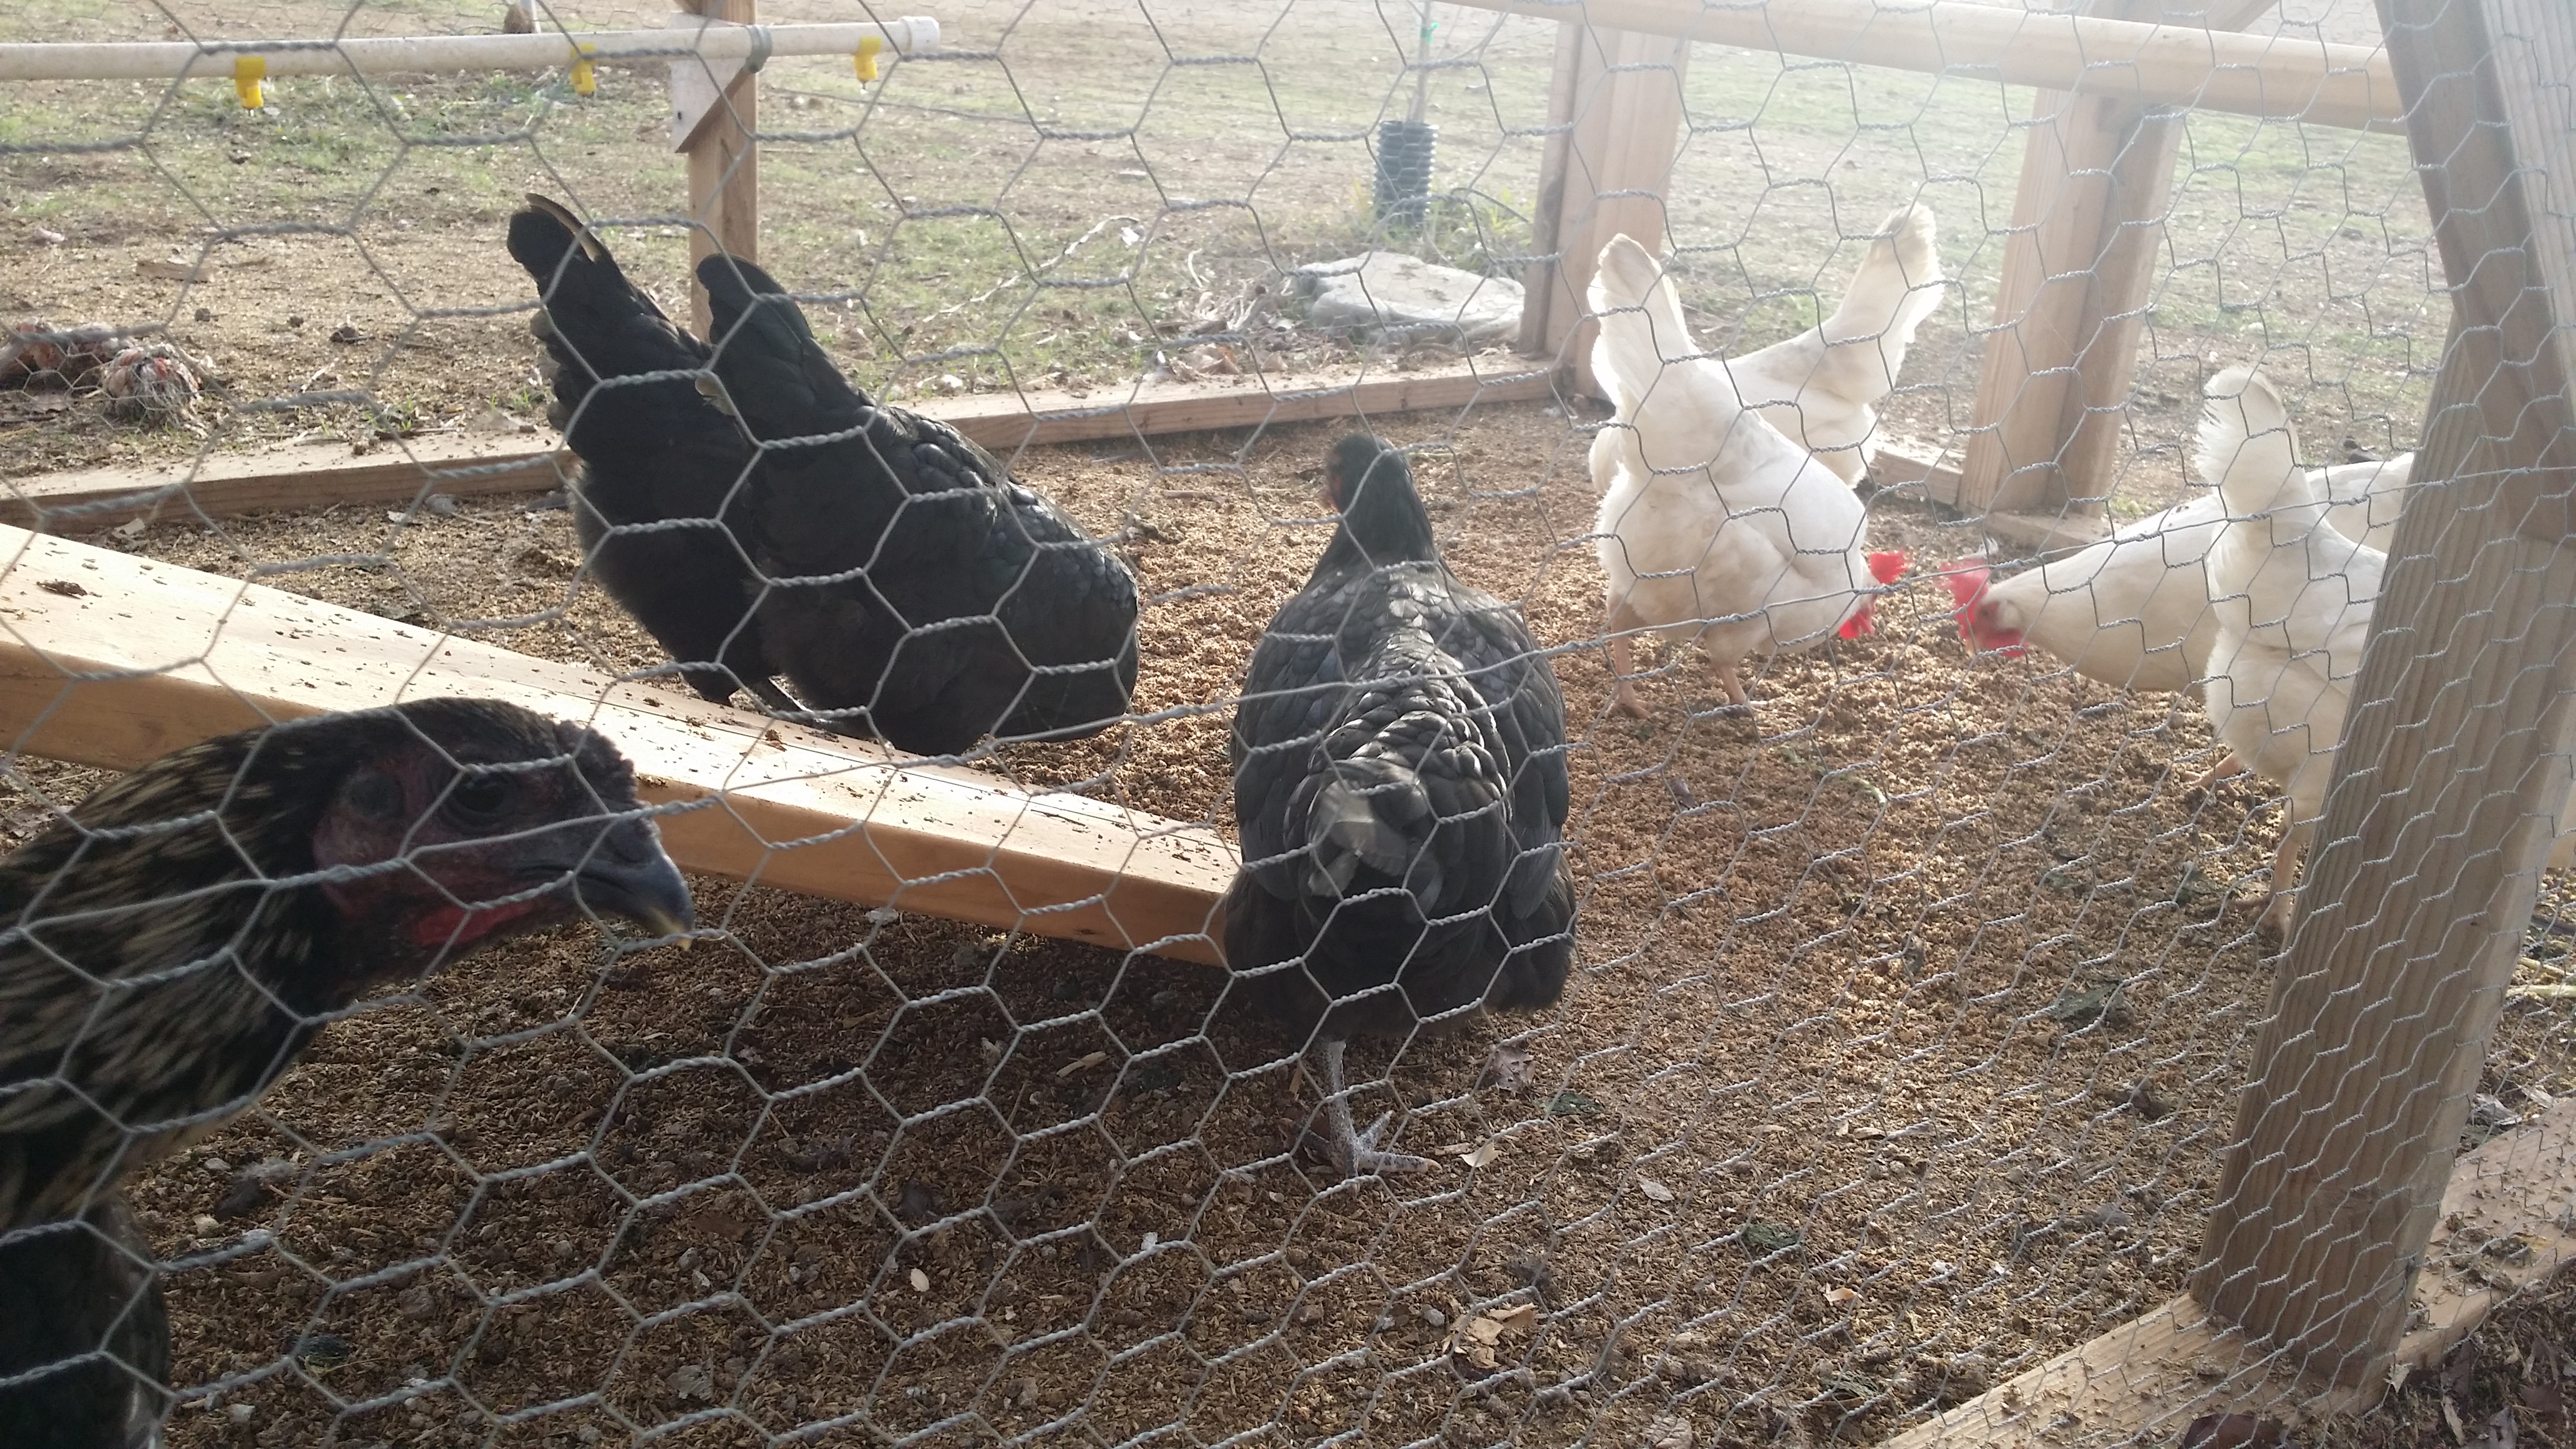 My Leghorns, Australorps, and Hmong rooster are enjoying some spent brewer's grain. A thoughtful home brewer gives me all his steeping grains after he brews his beer. I love the price (free!) and my chickens love the taste.